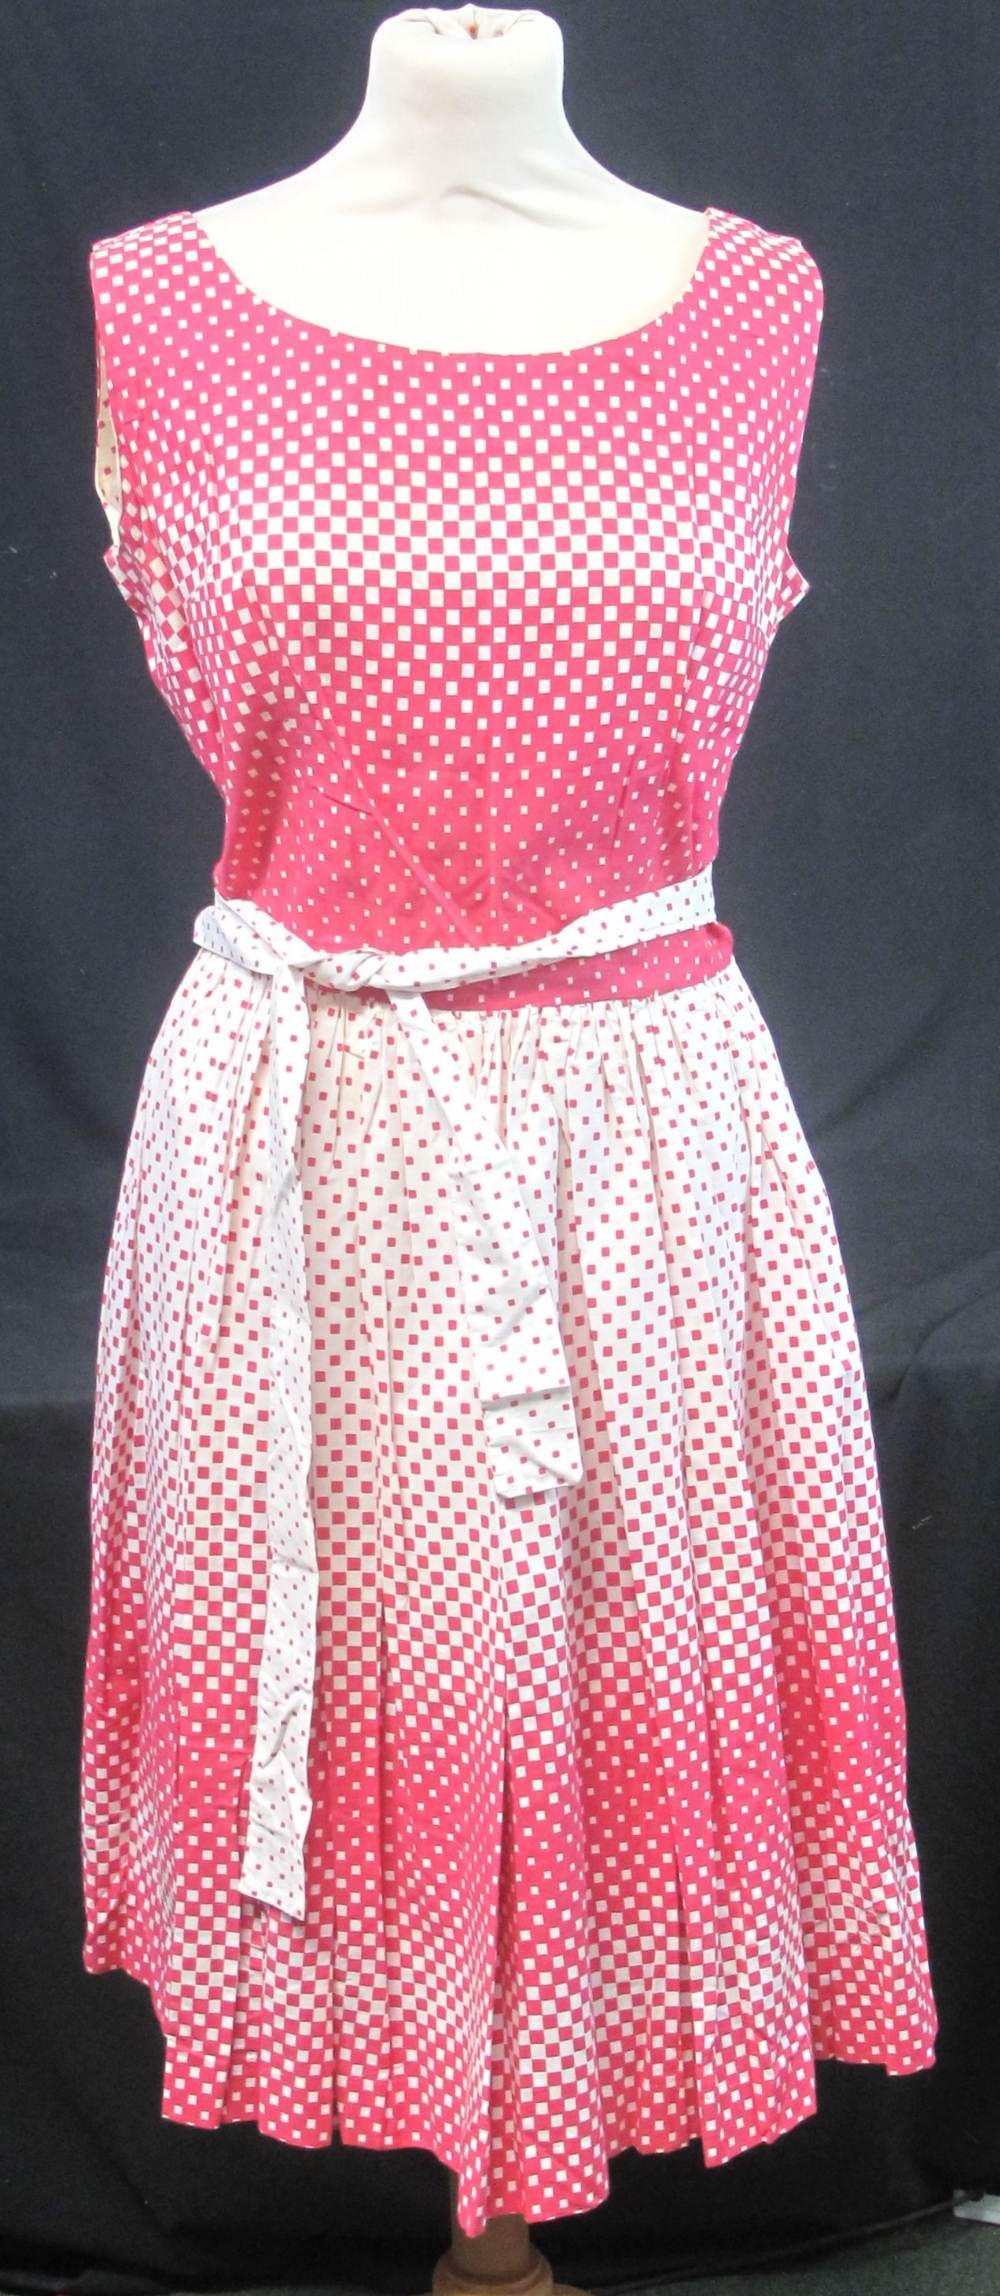 Five cotton 1950's summer dresses to include: lilac belted dress with lace insert, - Image 4 of 8